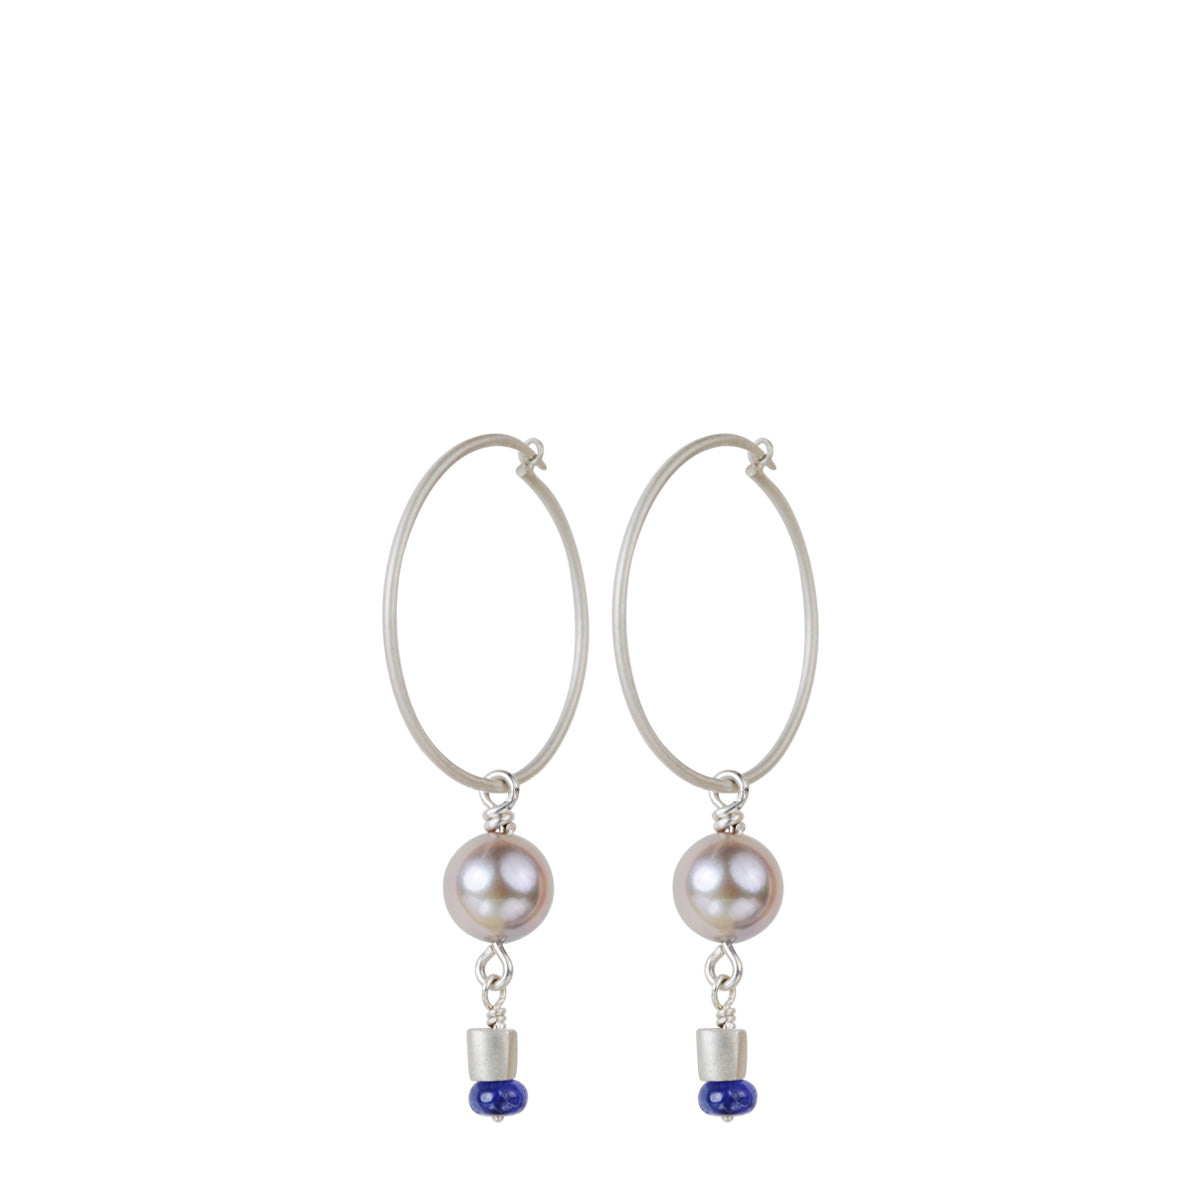 Sterling Silver Simple Hoop Earrings with Akoya Pearls and Blue Sapphire Beads